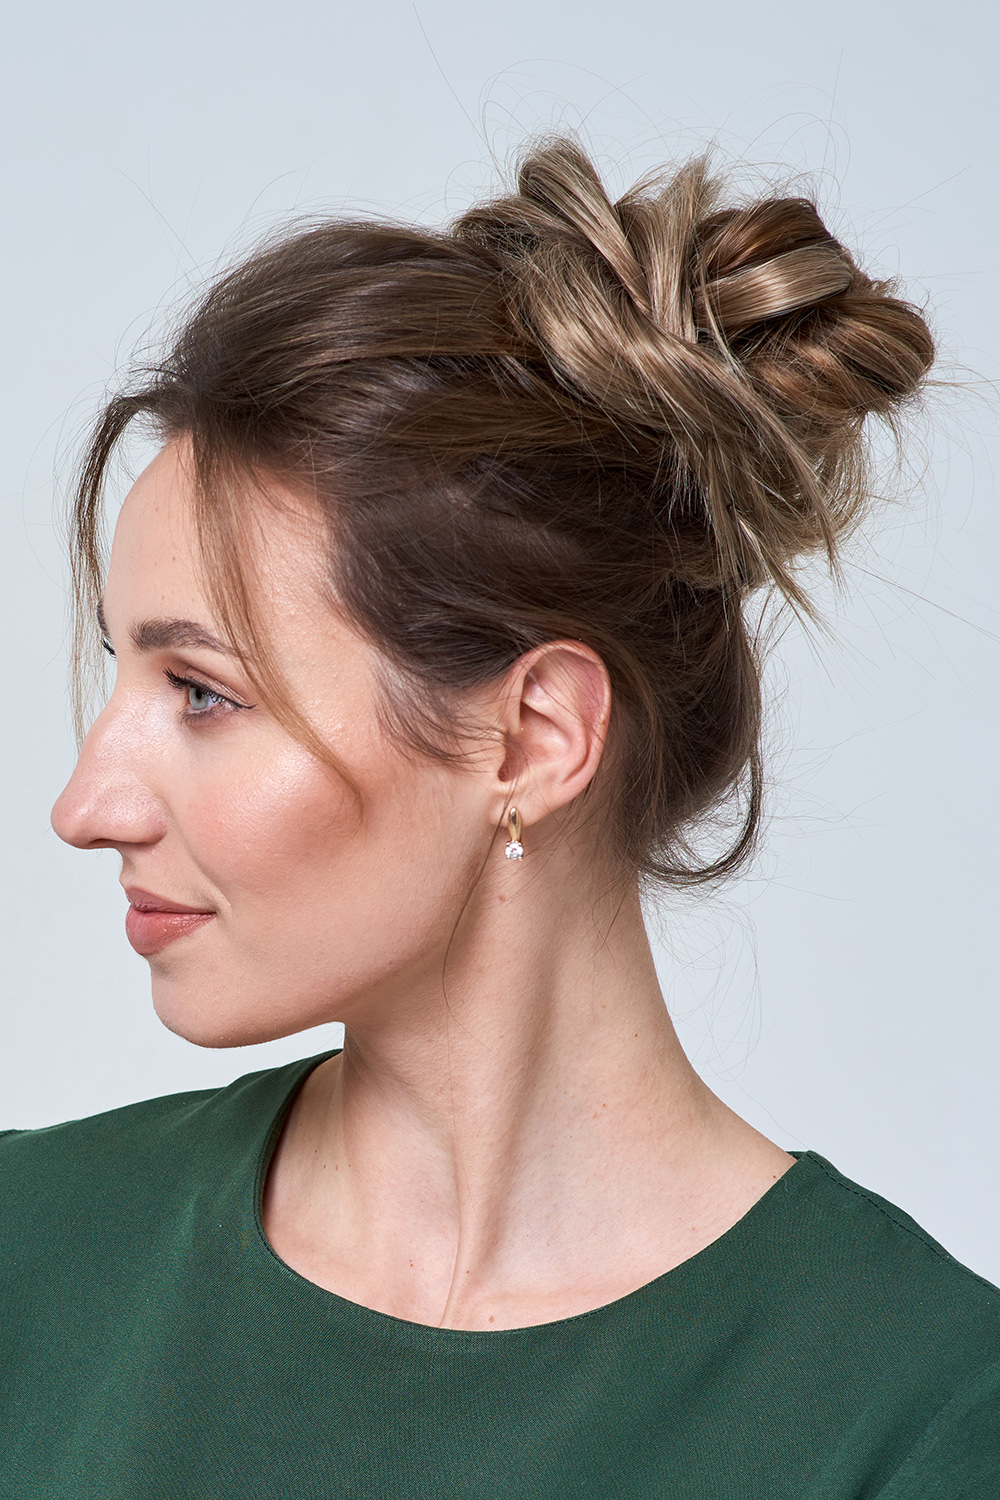 How to Do a Messy Bun Even if Your Hair Is Short and Thin